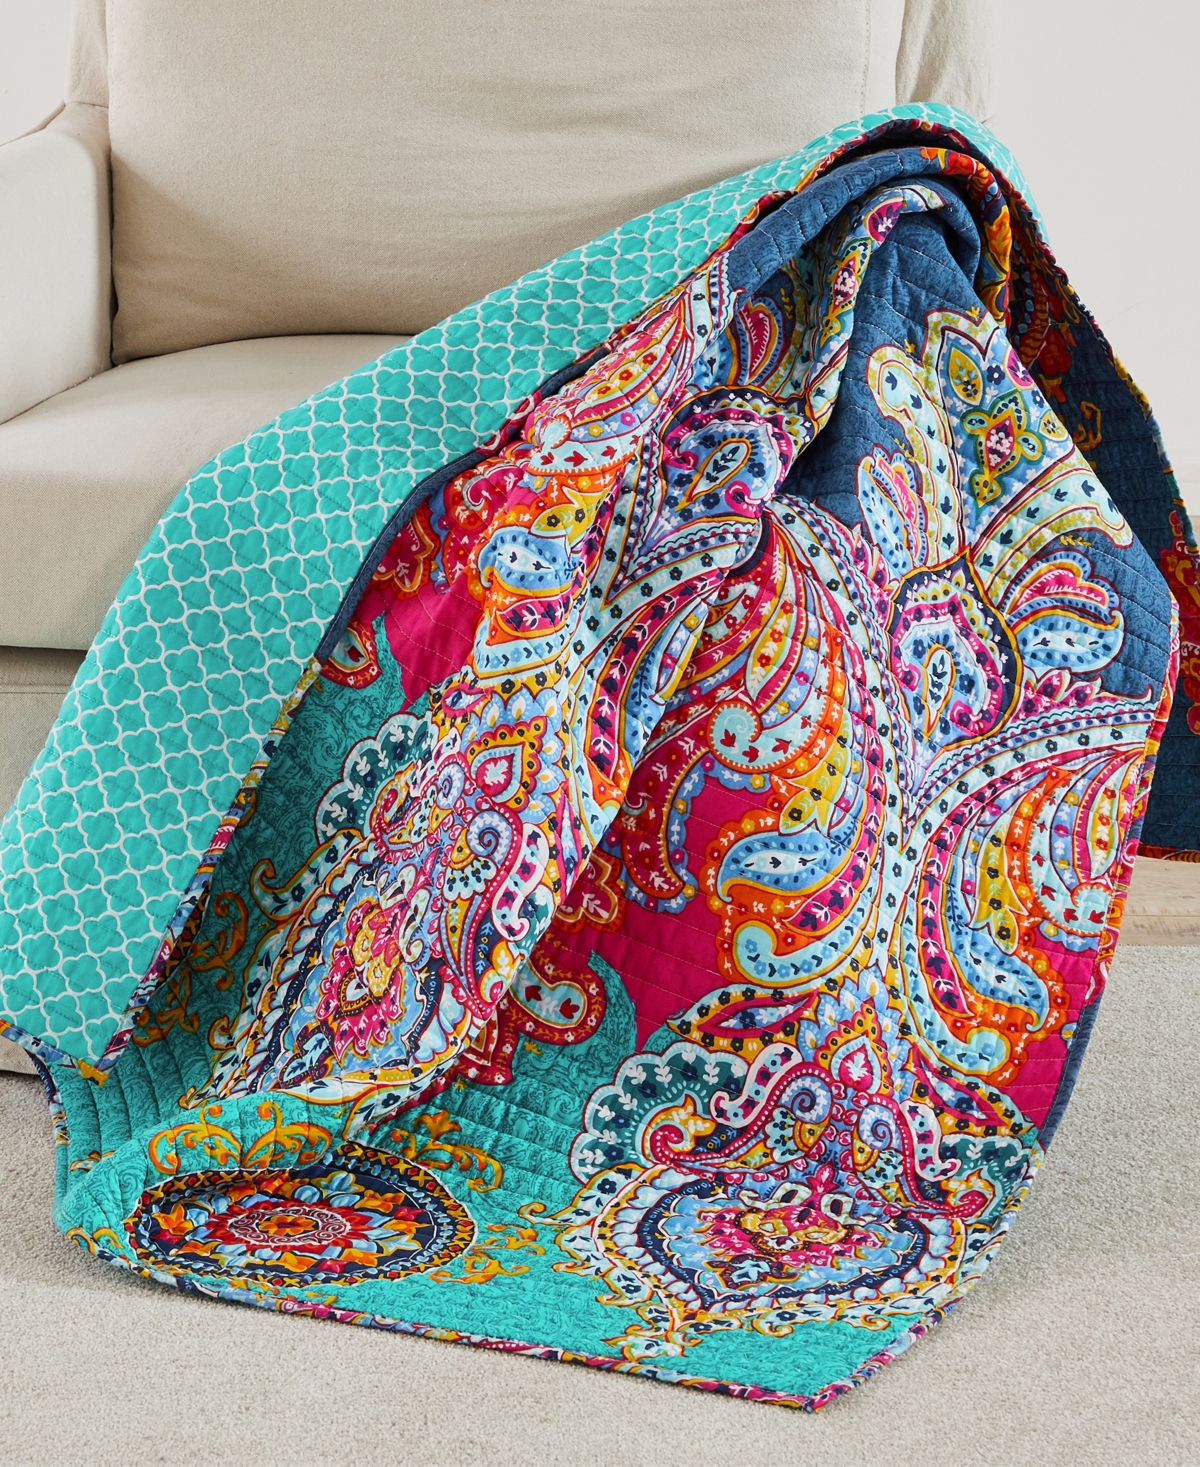 Levtex Fantasia Boho Reversible Quilted Throw, 50" X 60" In Multi